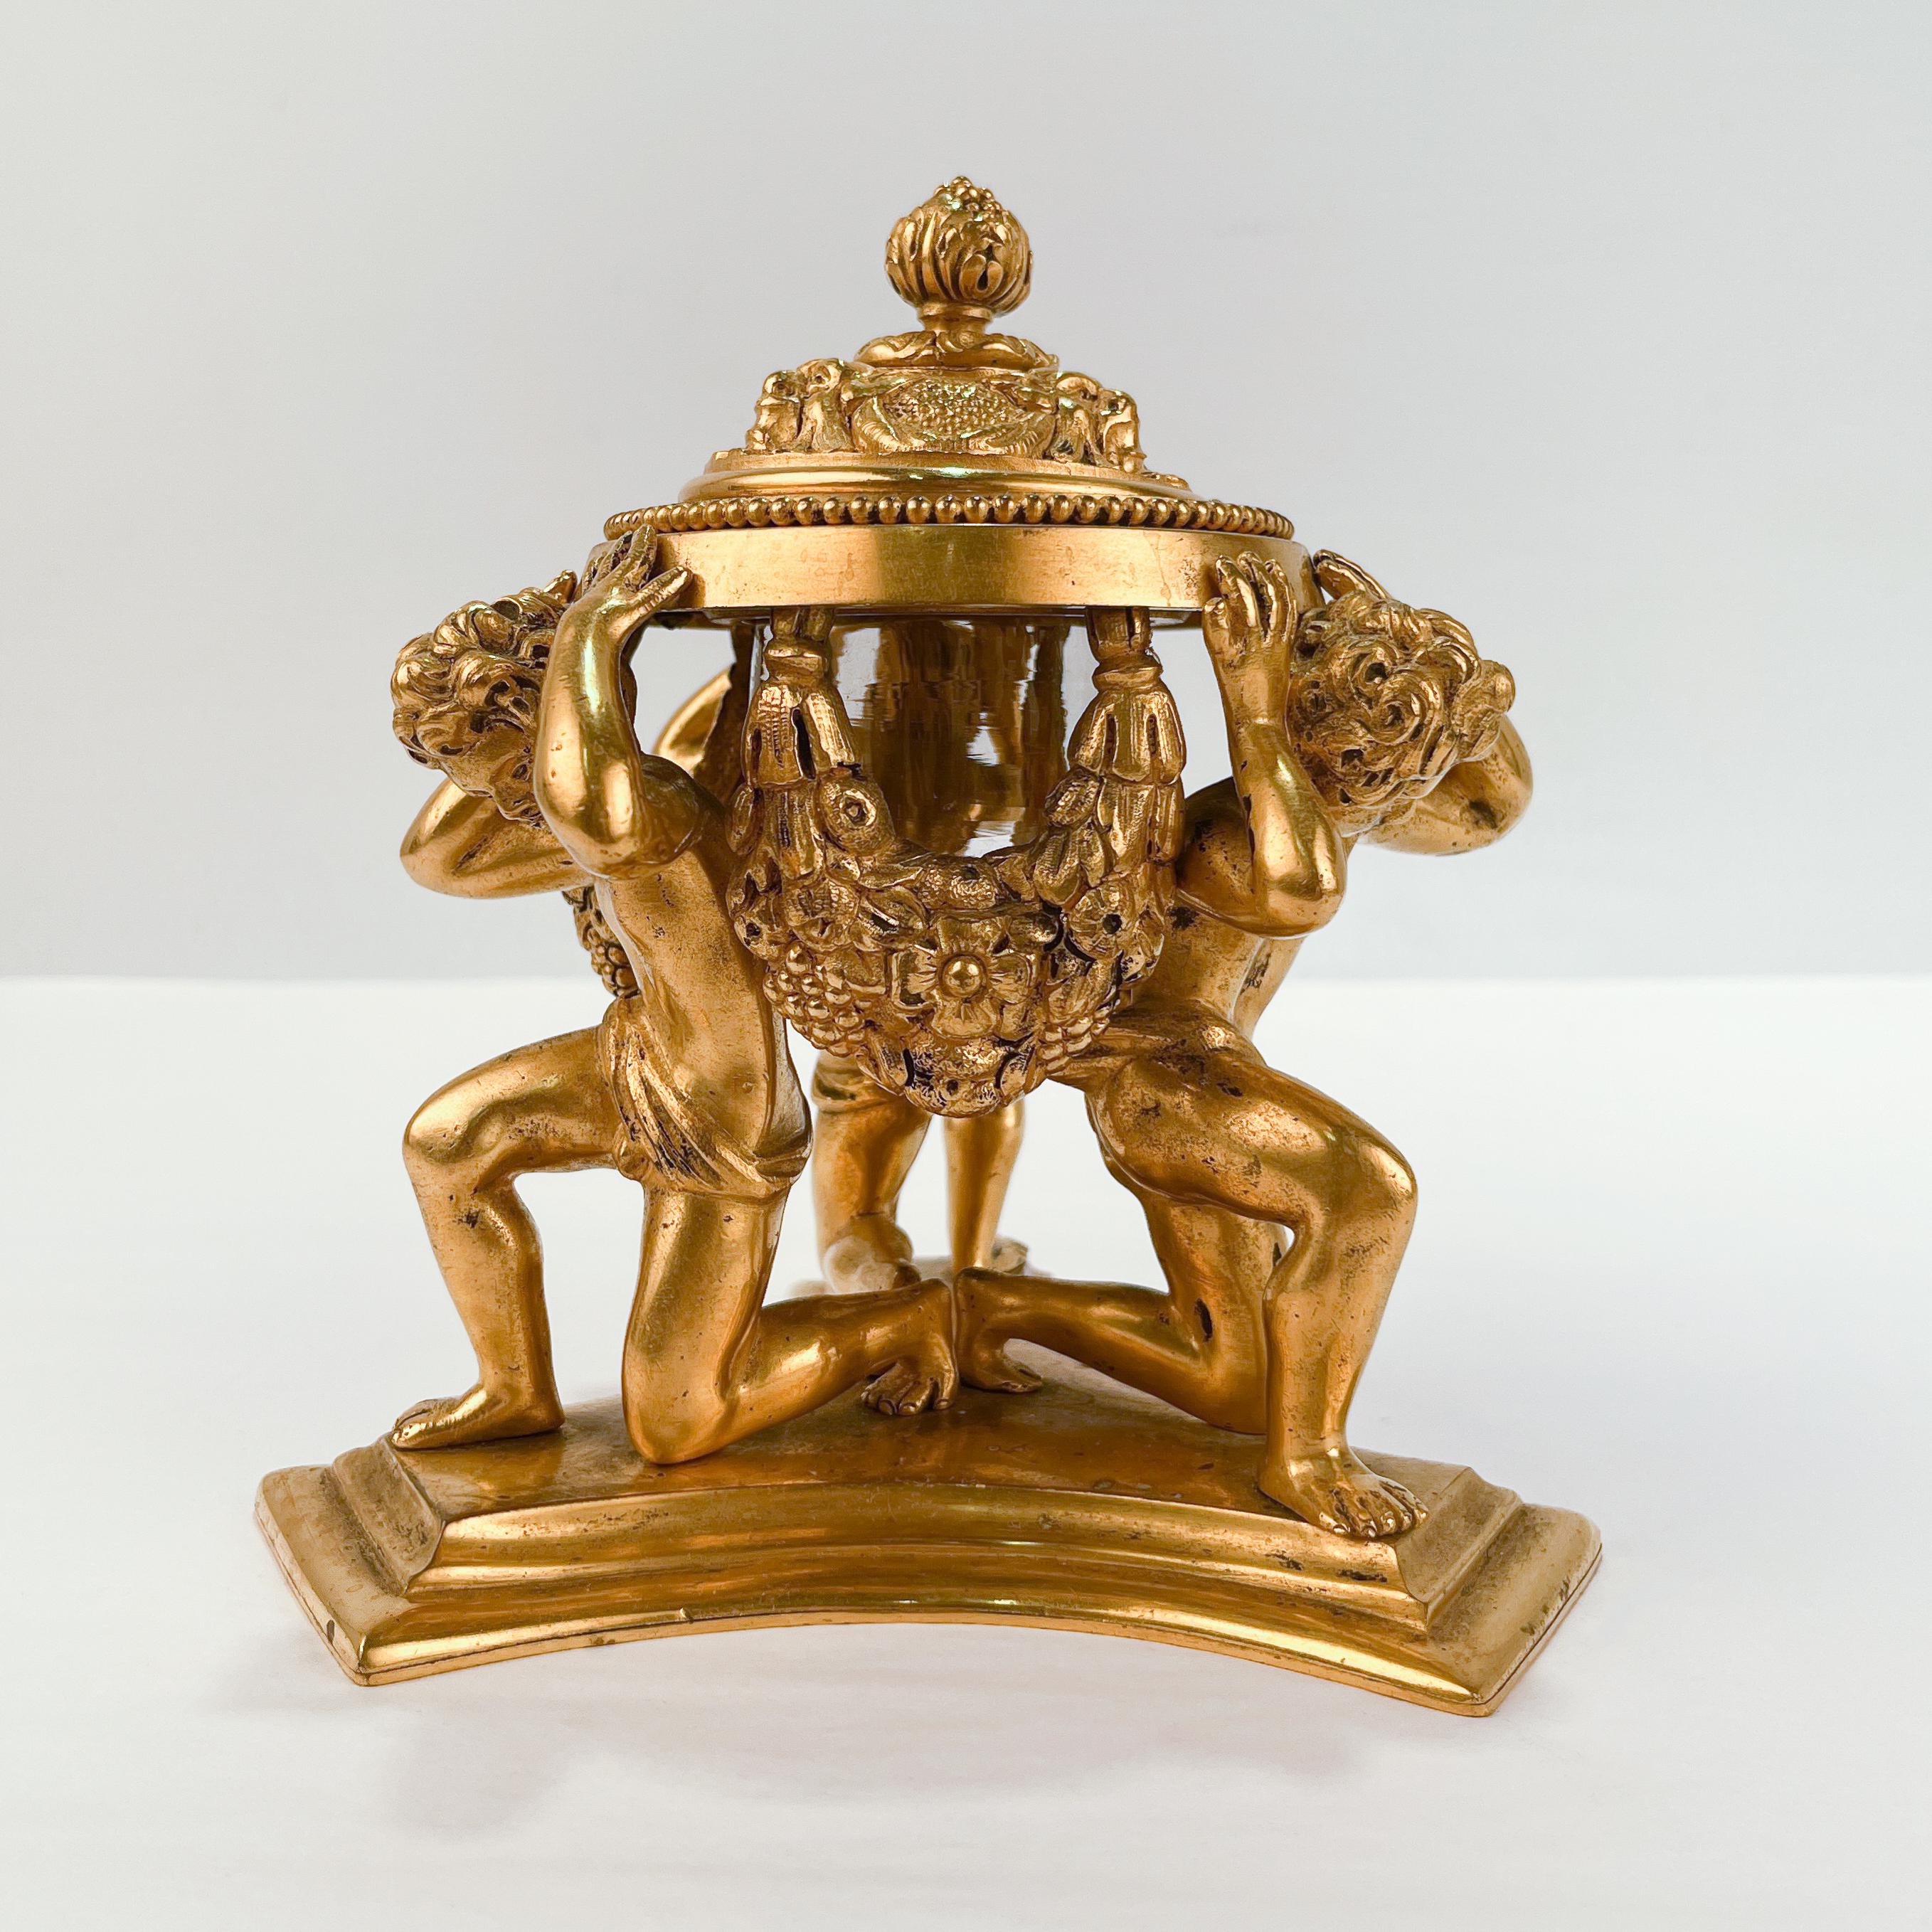 Edwardian Antique Gilded Age Figural Gilt Bronze Inkwell by E.F. Caldwell